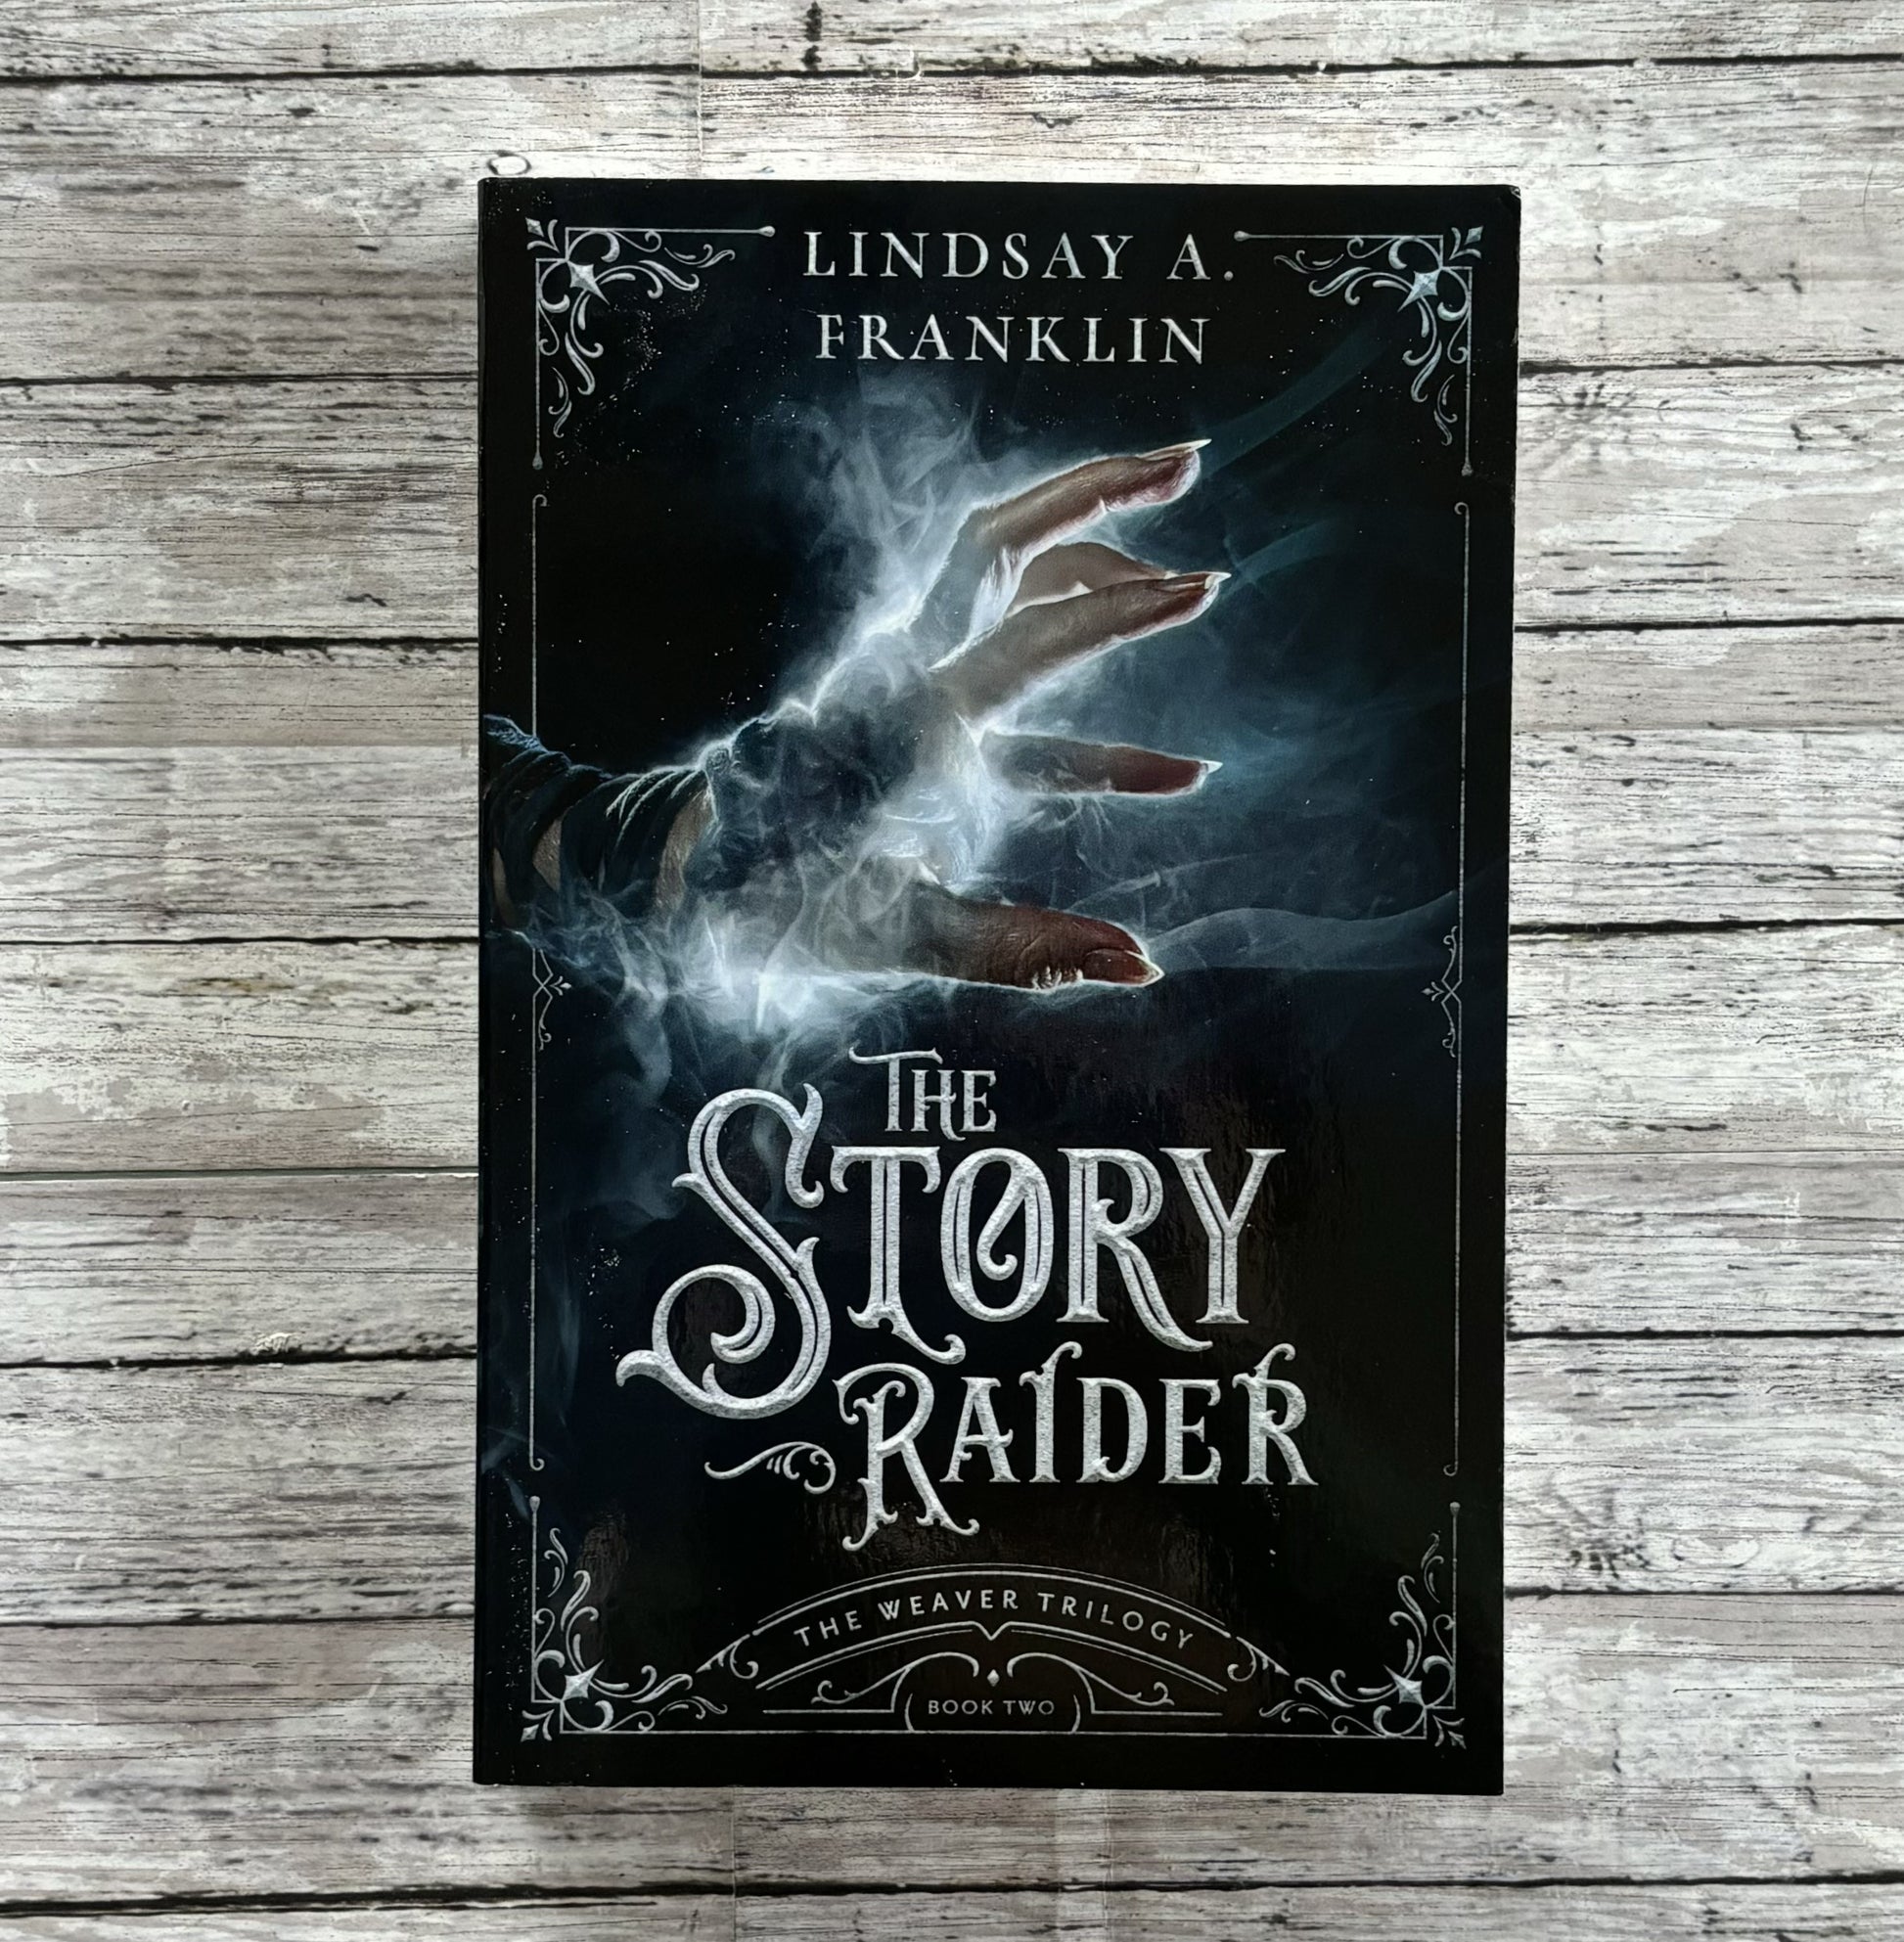 The Story Raider by Lindsay A. Franklin - Anchored Homeschool Resource Center